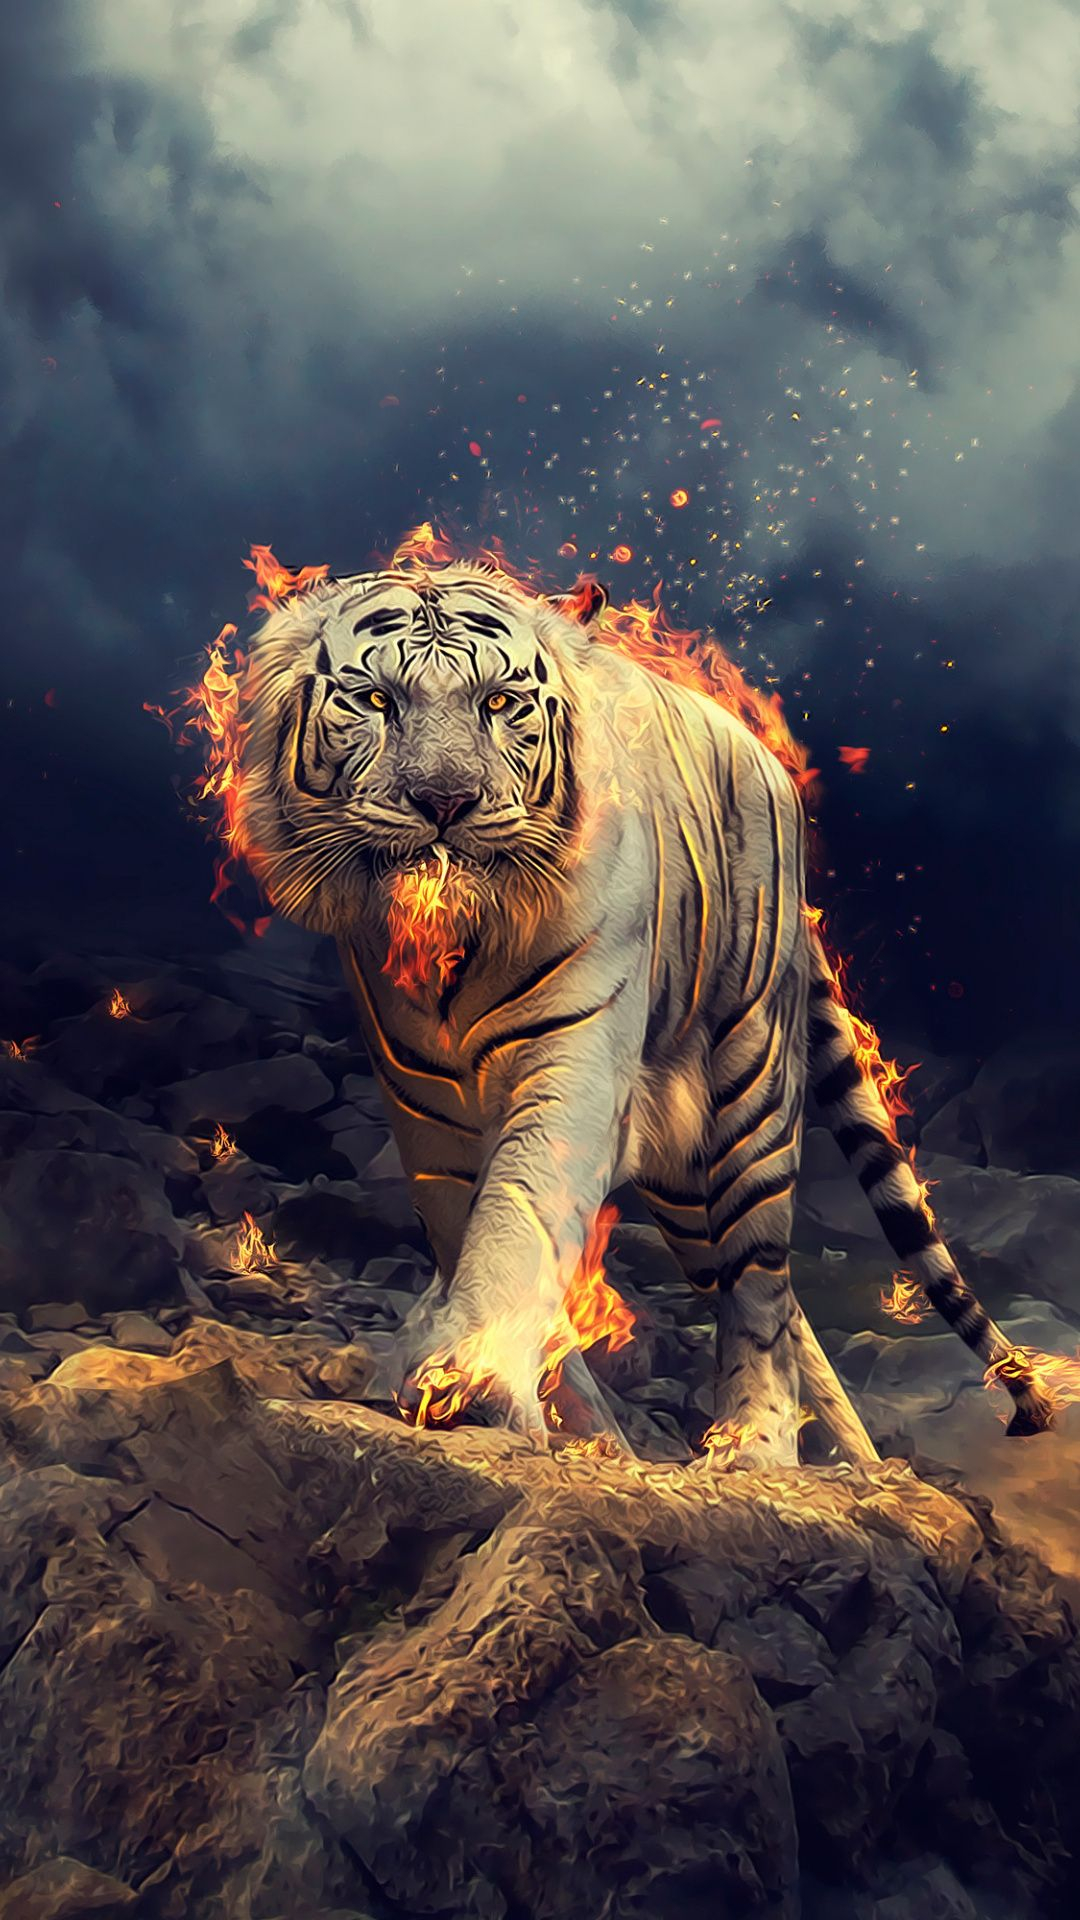 1080x1920 Angry, raging, white tiger, wallpaper | Tiger wallpaper, Wild animal wallpaper, Tiger artwork